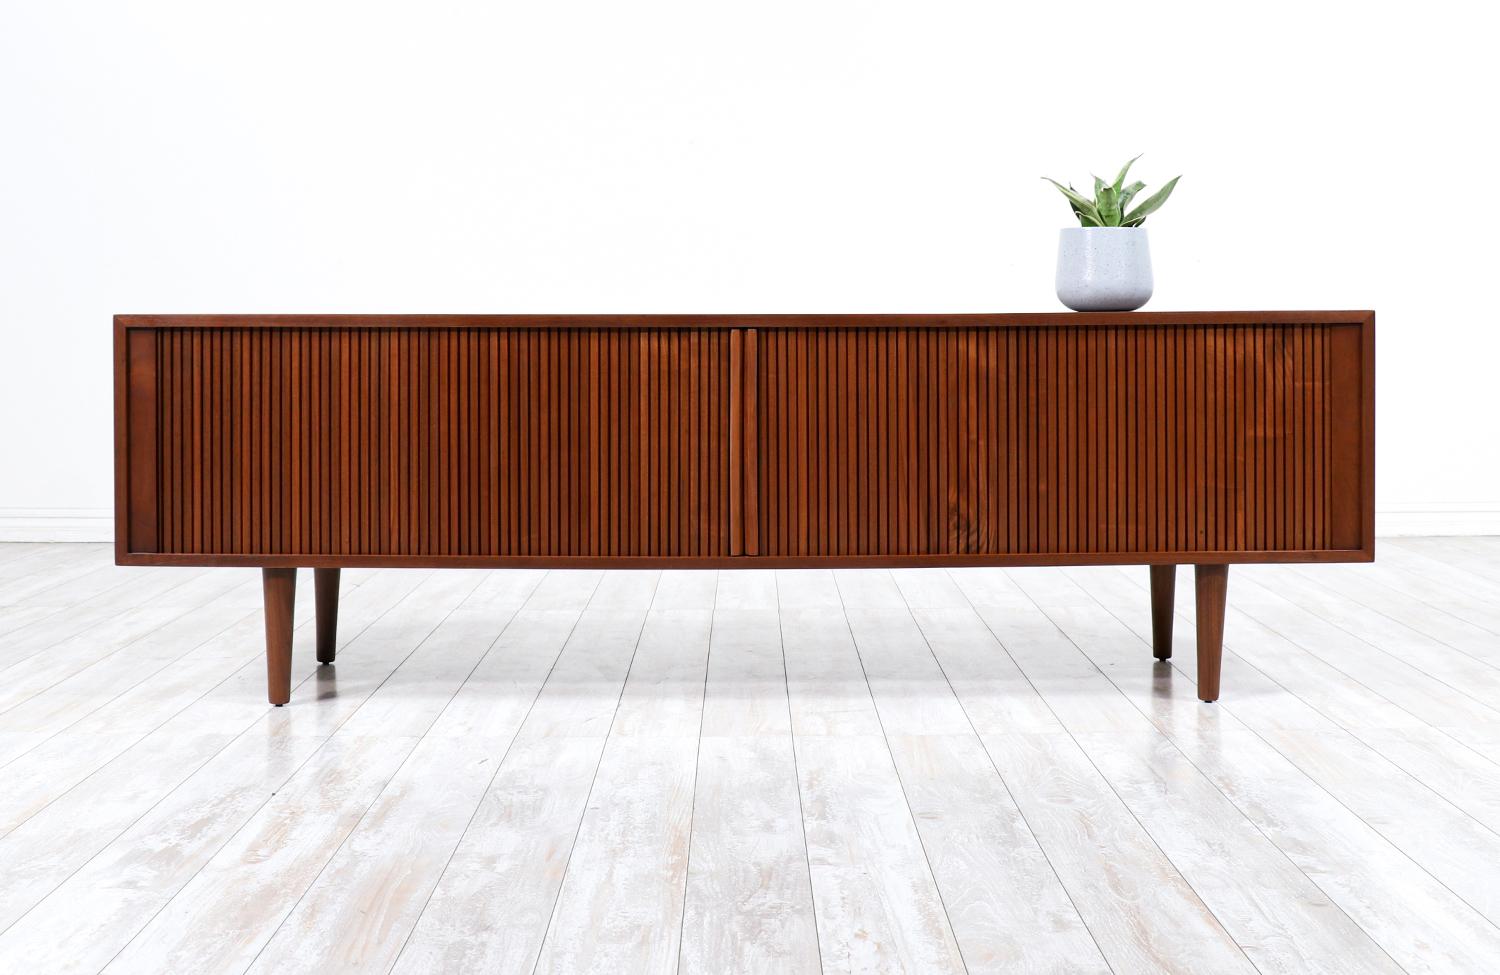 Mid-Century Modern Tambour Door Credenza designed and manufactured in the United States in the 2010’s. Low in profile, this beautifully refinished walnut storage unit is accented with inconspicuously slatted door pulls for functional ease. With